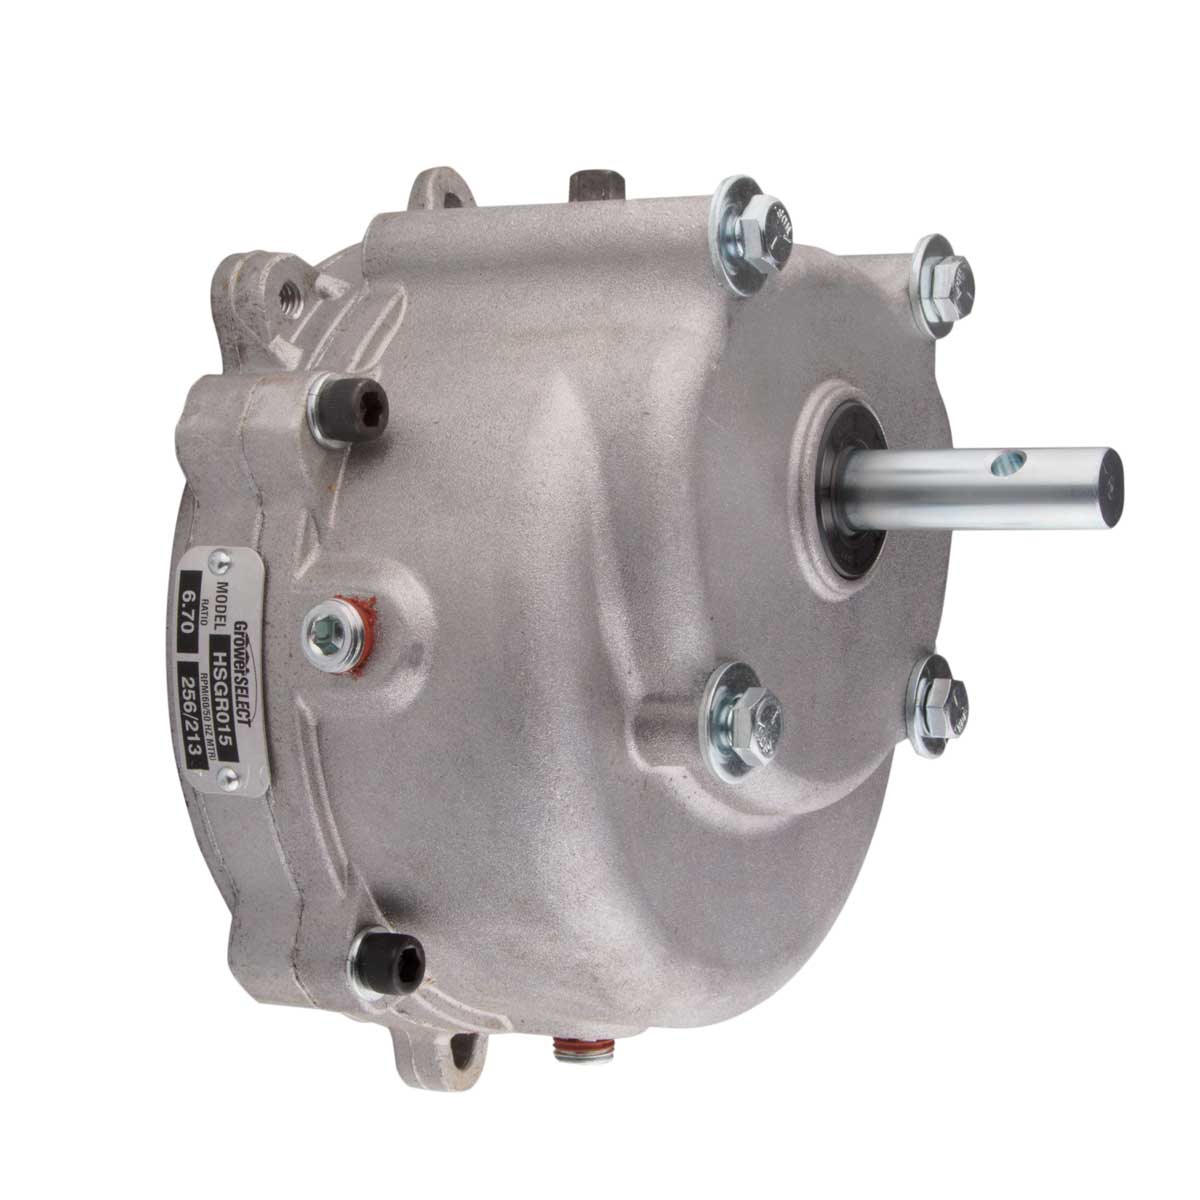 GrowerSELECT® auger gearheads come standard on our complete drive units and models are available that can be used to replace worn gearheads on other brands of flexible auger drive units.